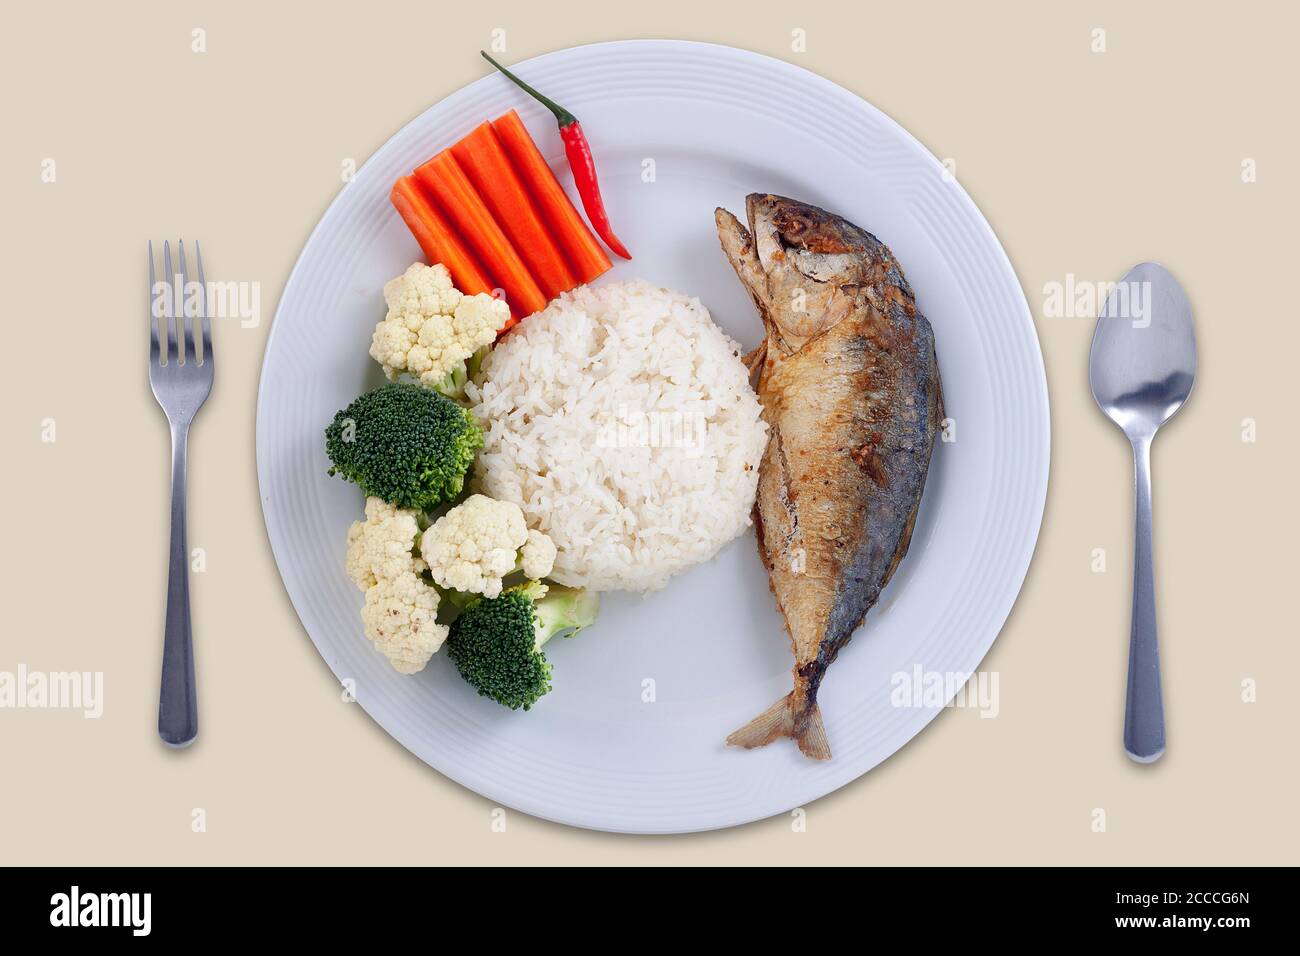 Healthy food concept : mackerel fish with different vegetable topping on rice , clean food Stock Photo